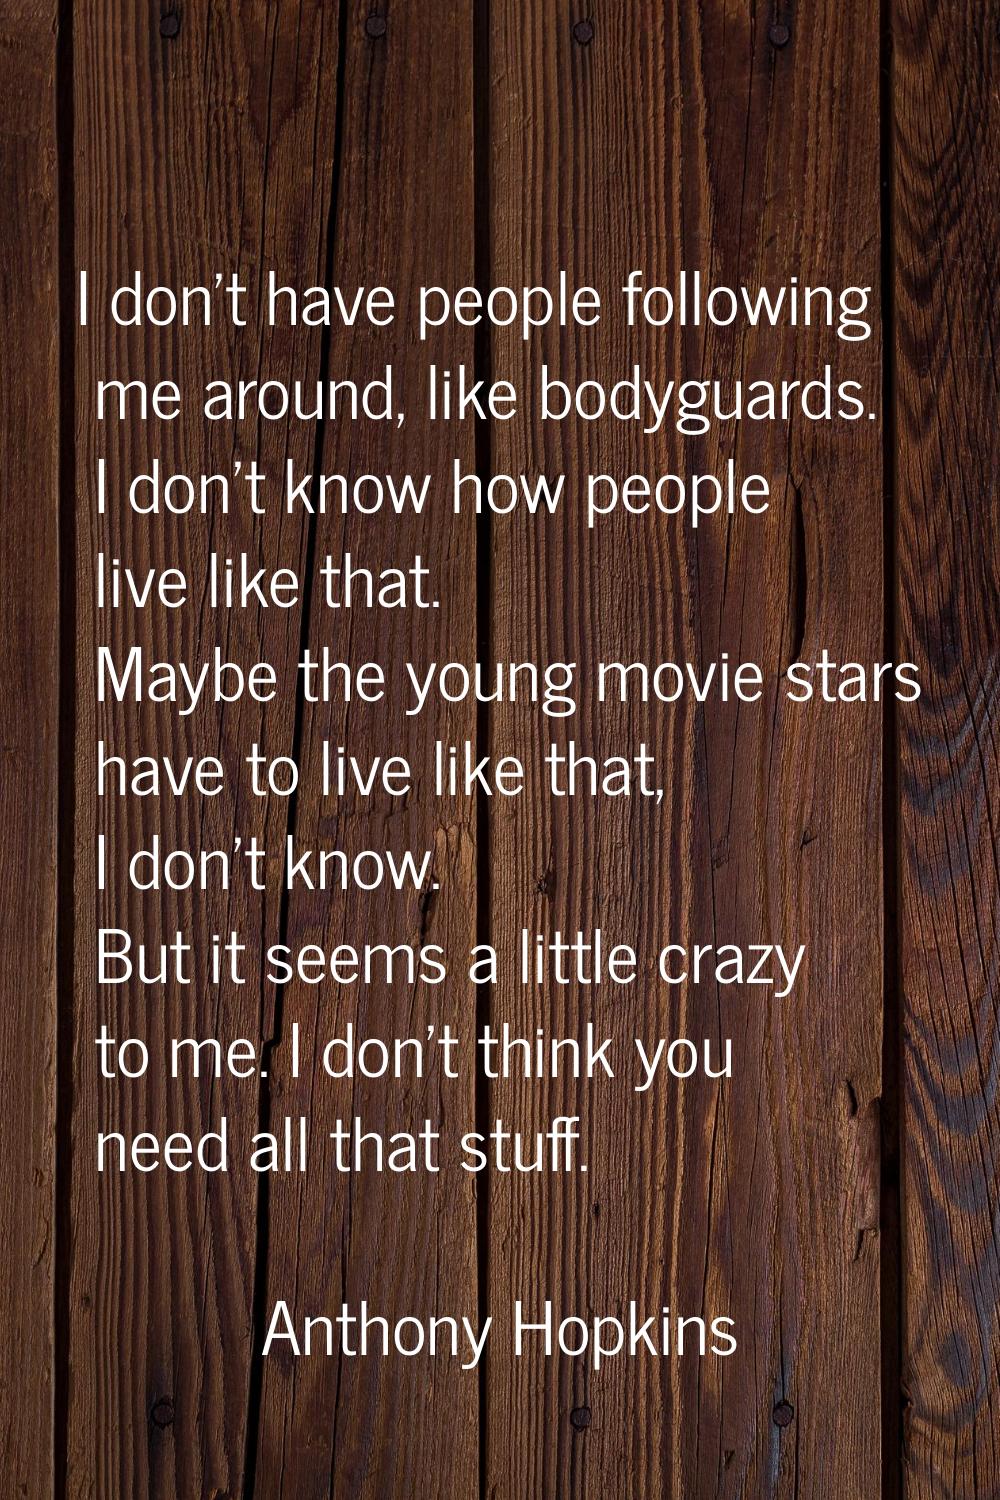 I don't have people following me around, like bodyguards. I don't know how people live like that. M